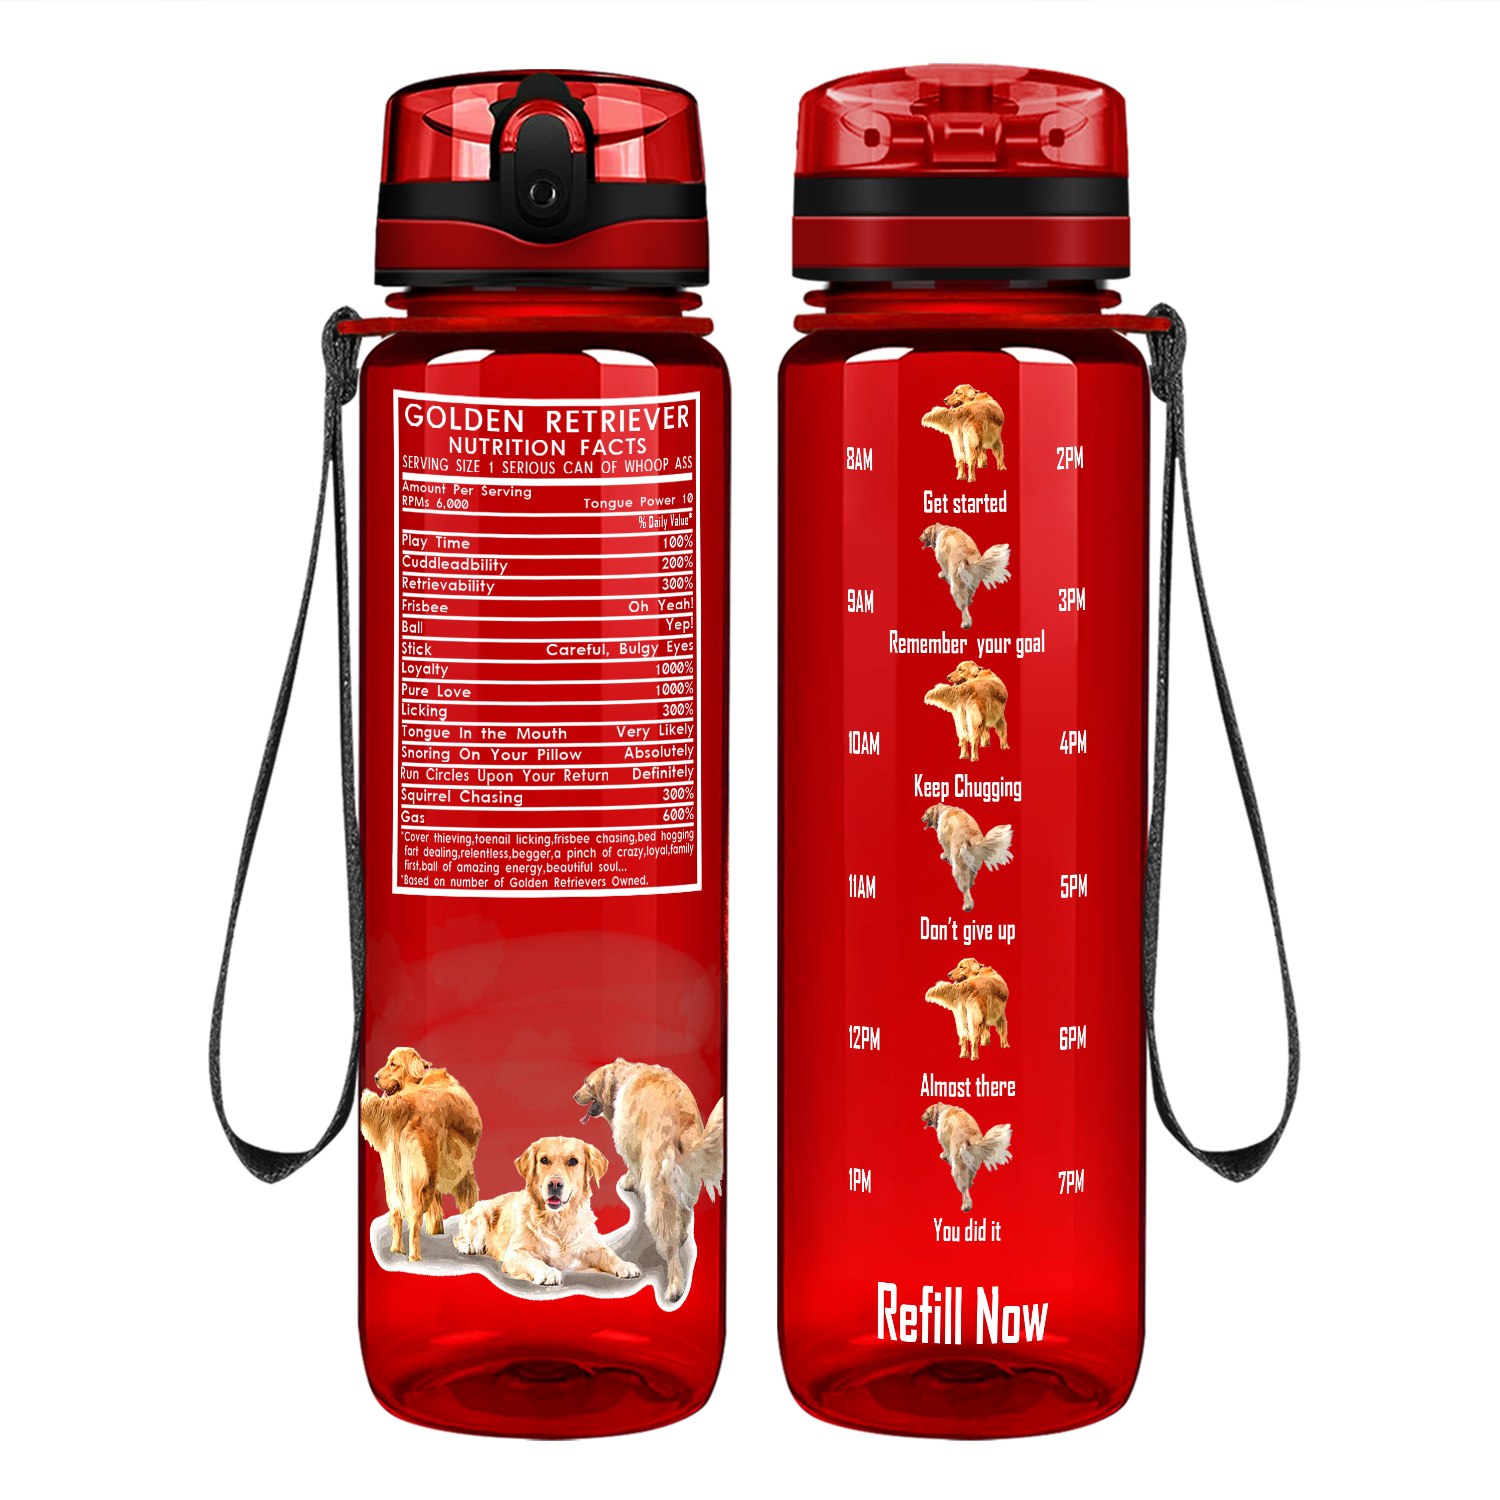 Golden Retriever Nutrition Facts on 32 oz Motivational Tracking Water Bottle